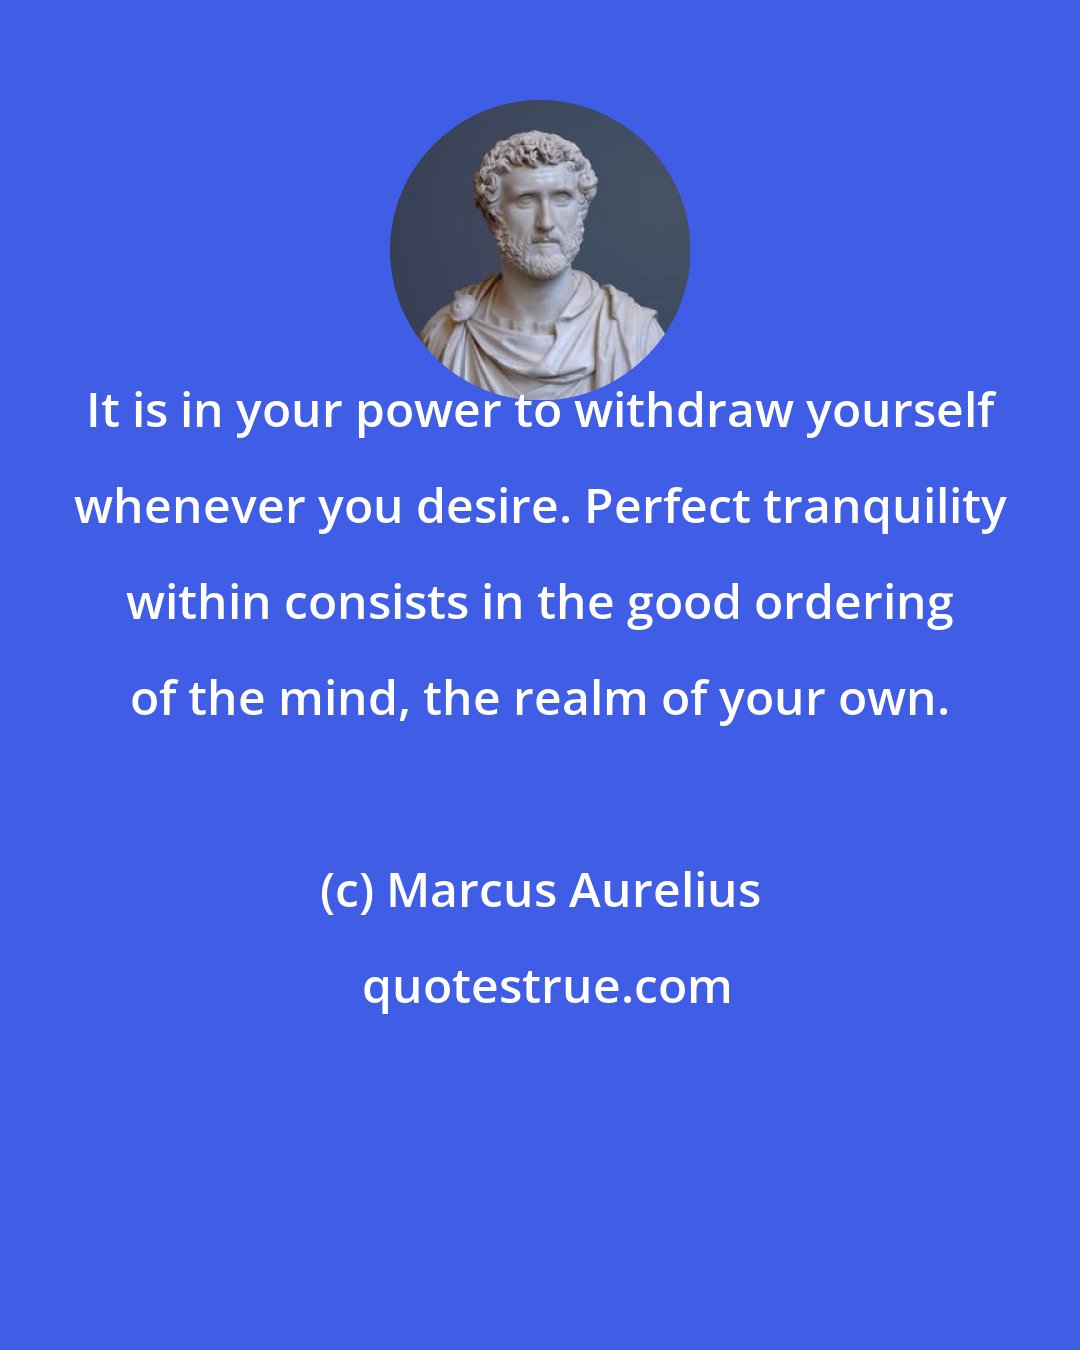 Marcus Aurelius: It is in your power to withdraw yourself whenever you desire. Perfect tranquility within consists in the good ordering of the mind, the realm of your own.